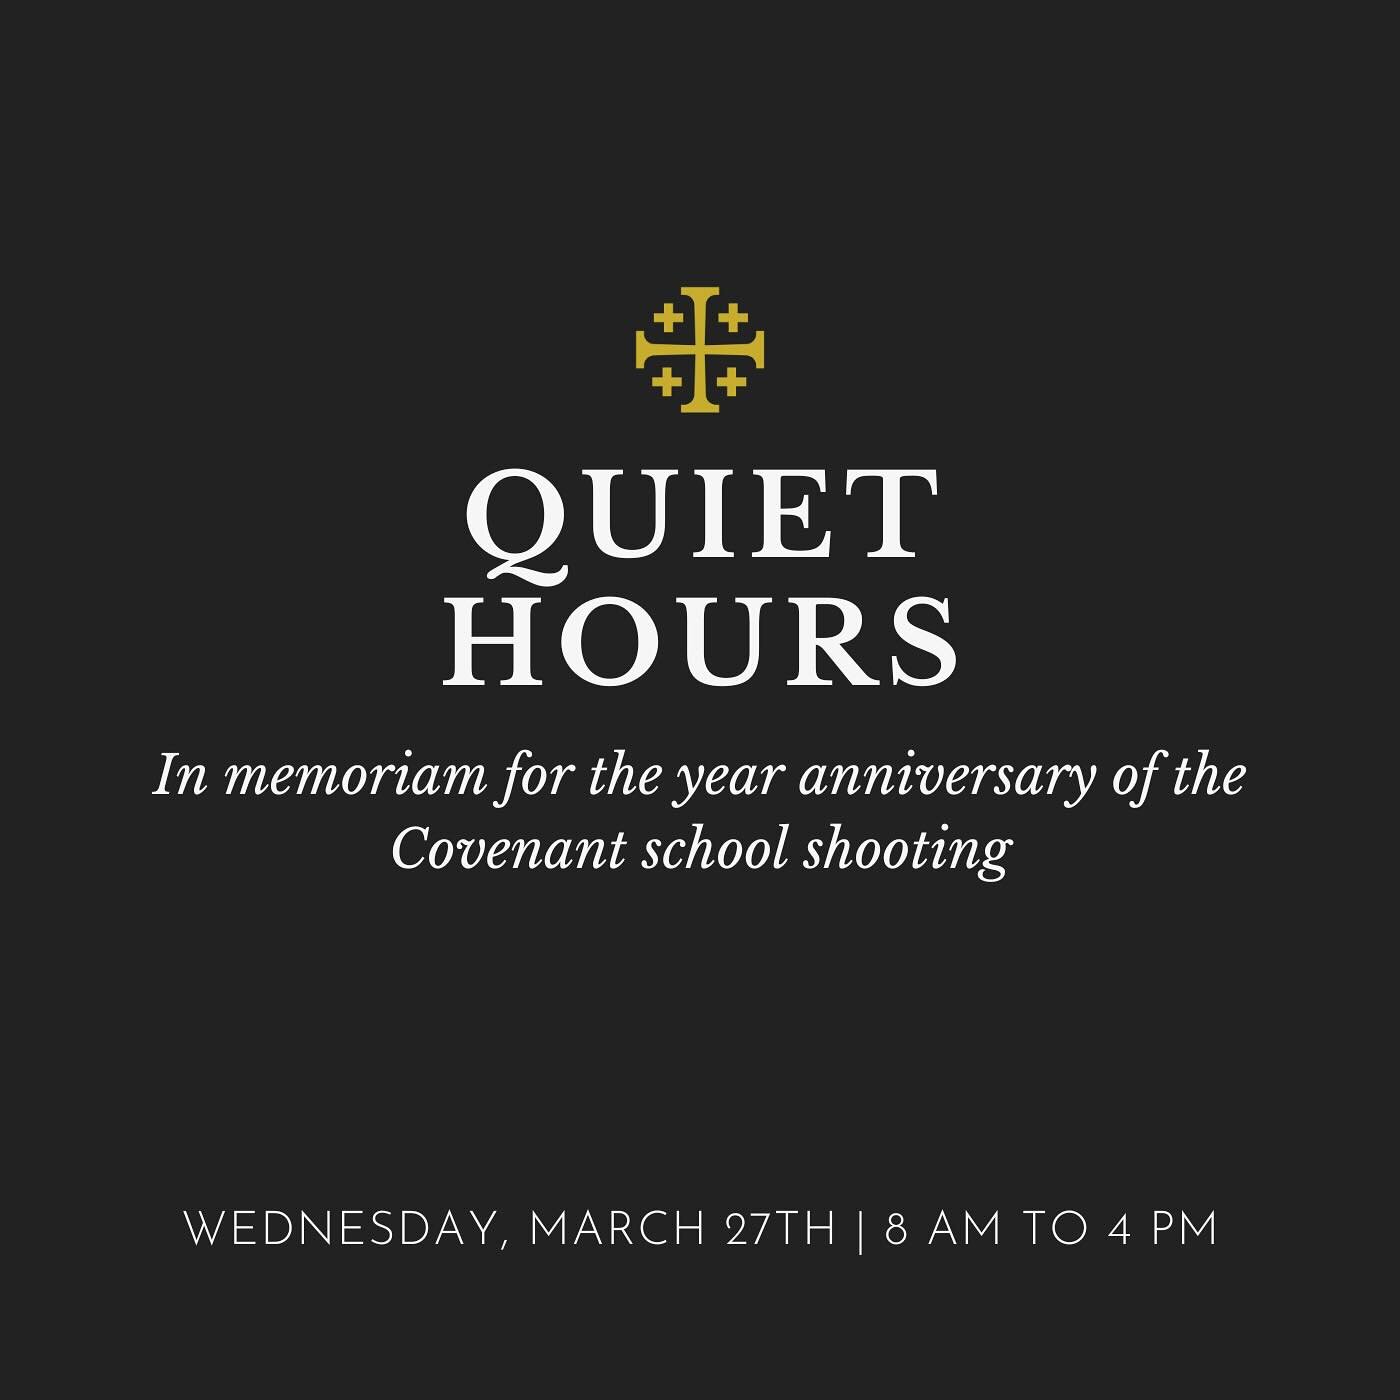 Wednesday, March 27th marks the year anniversary of the Covenant School shooting. We will be opening up the sanctuary between 8 AM to 4 PM for a space of quiet prayer and contemplation, lamenting the&nbsp;continued violence in our world and rememberi